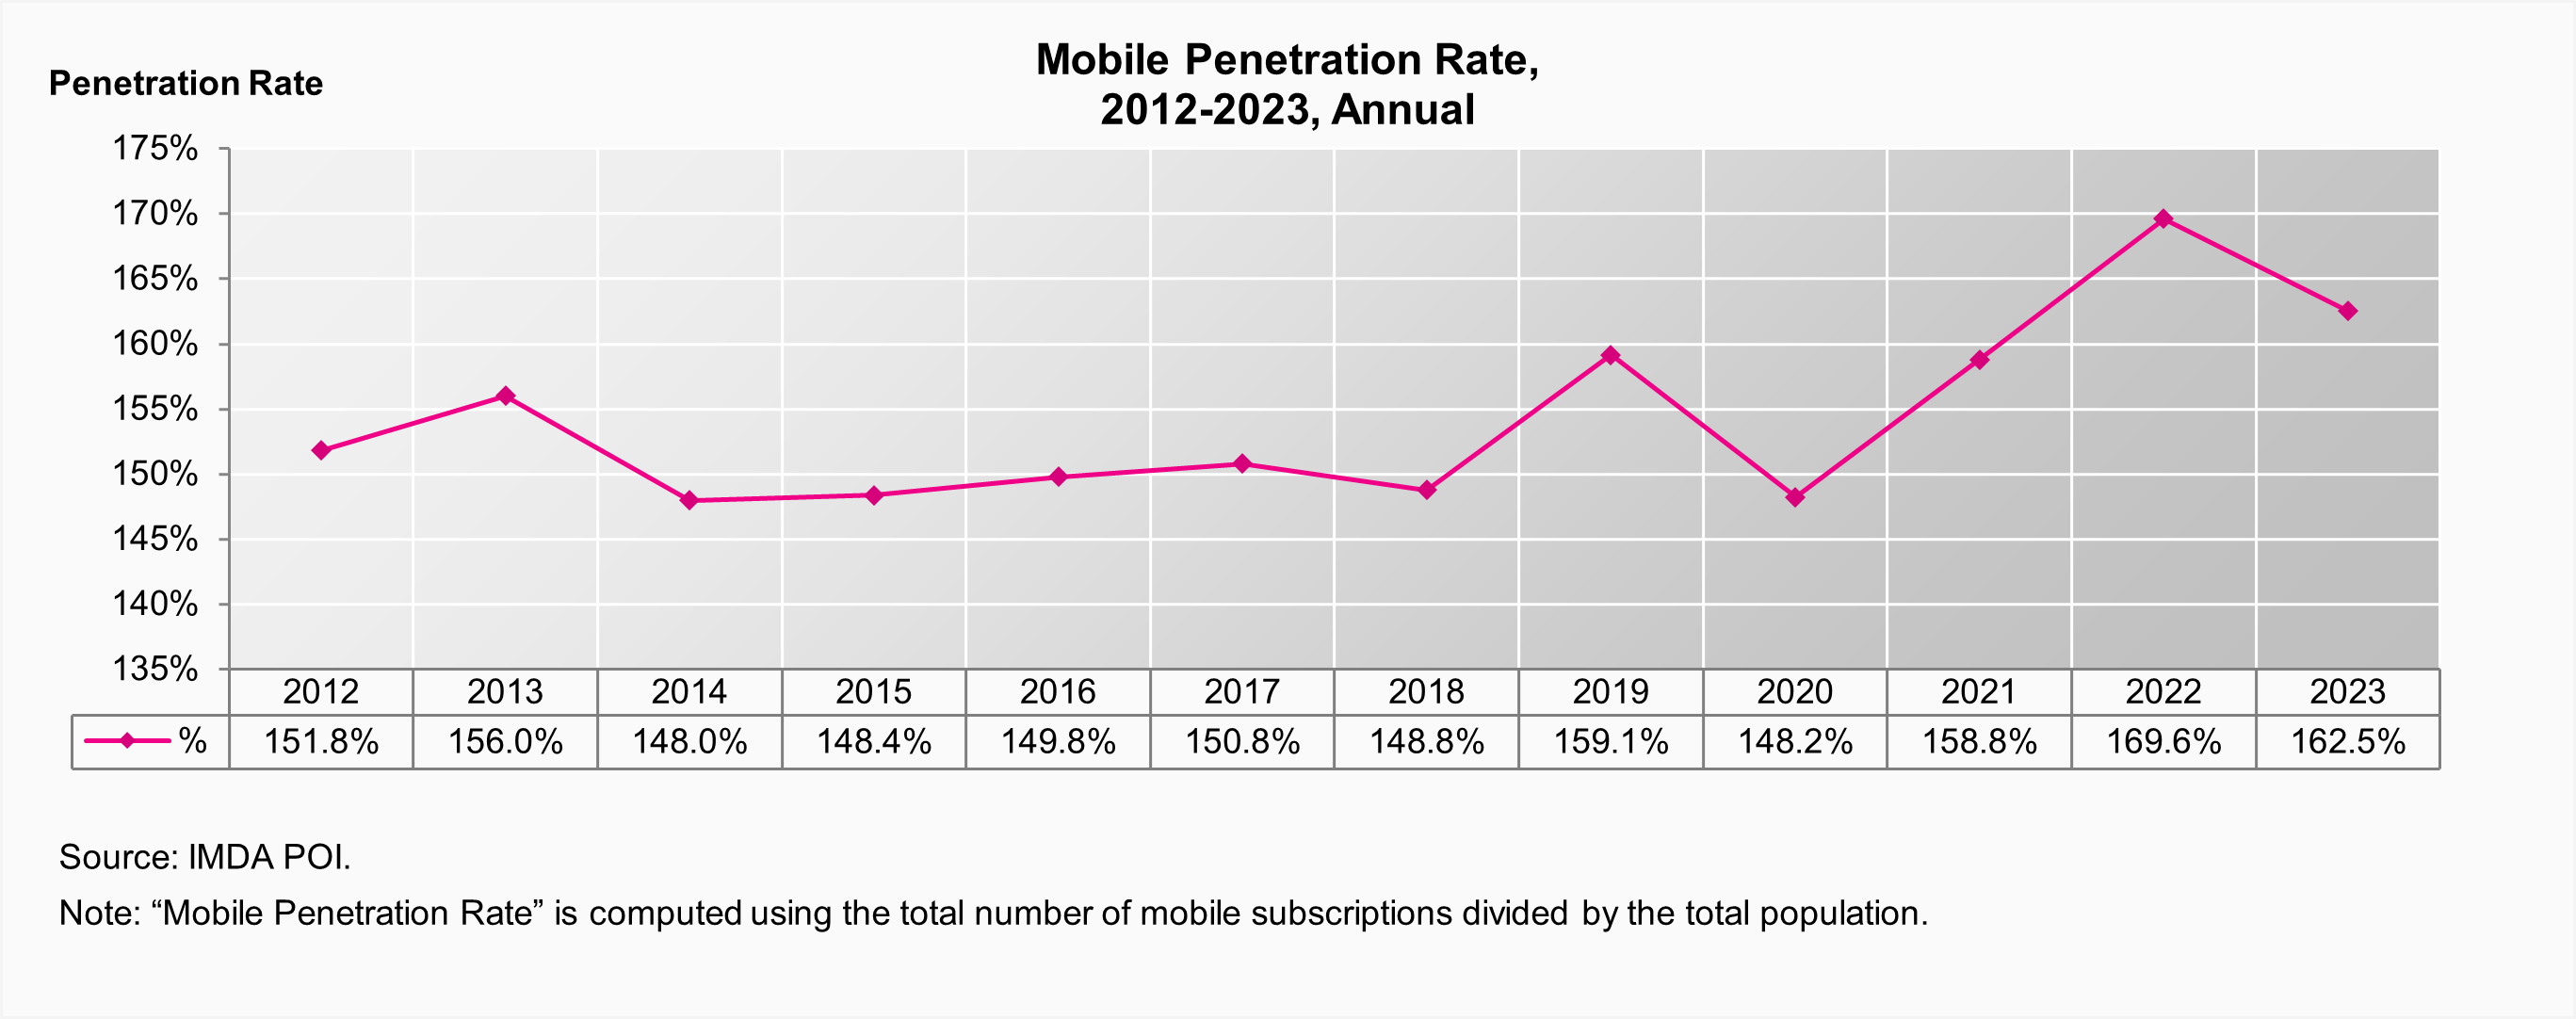 Mobile Penetration Rate